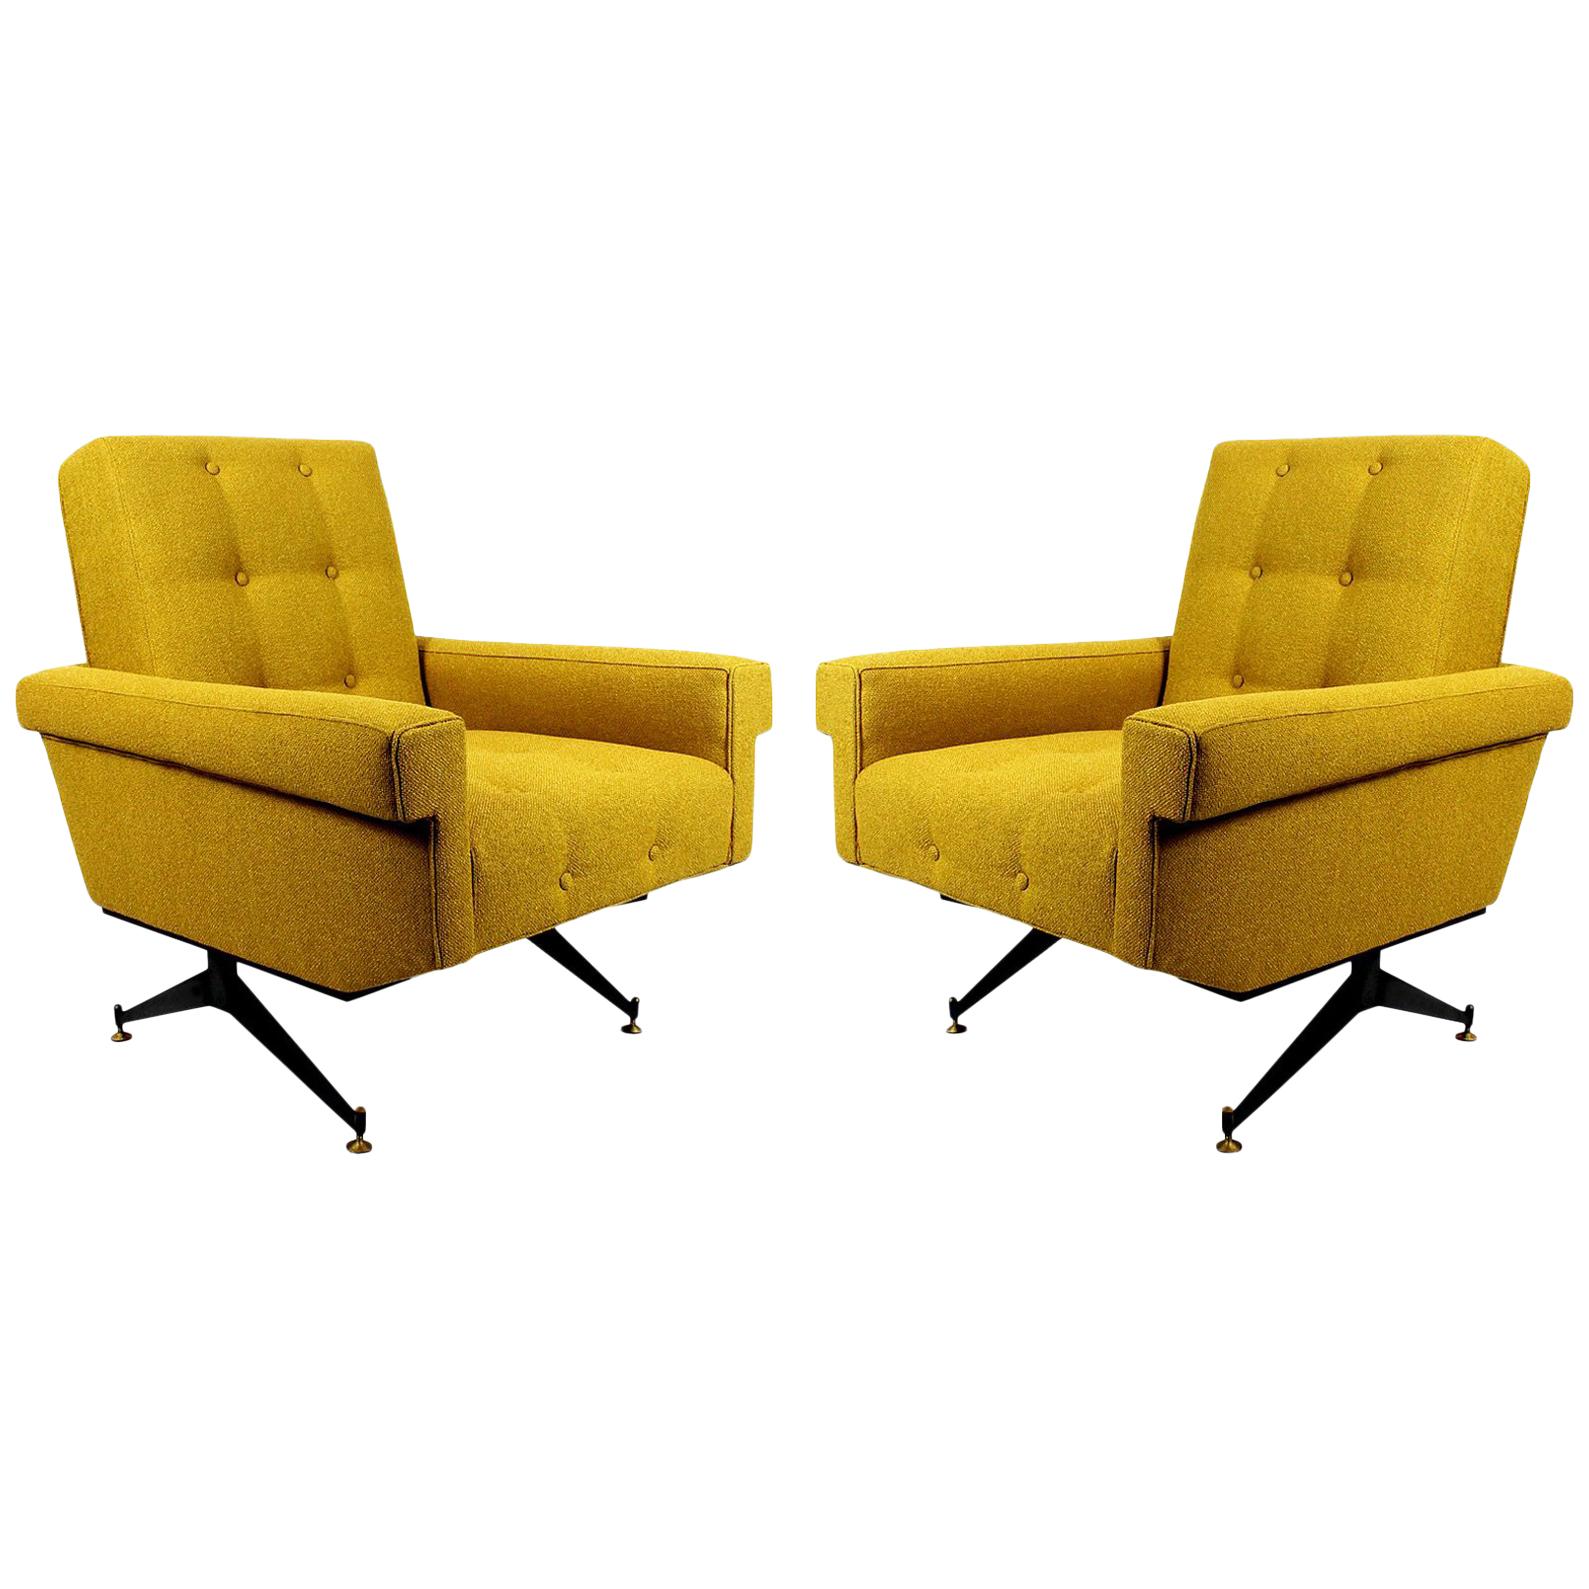 Pair of Mid-Century Modern Padded Armchairs With Yellow-Mustard Fabric - Italy